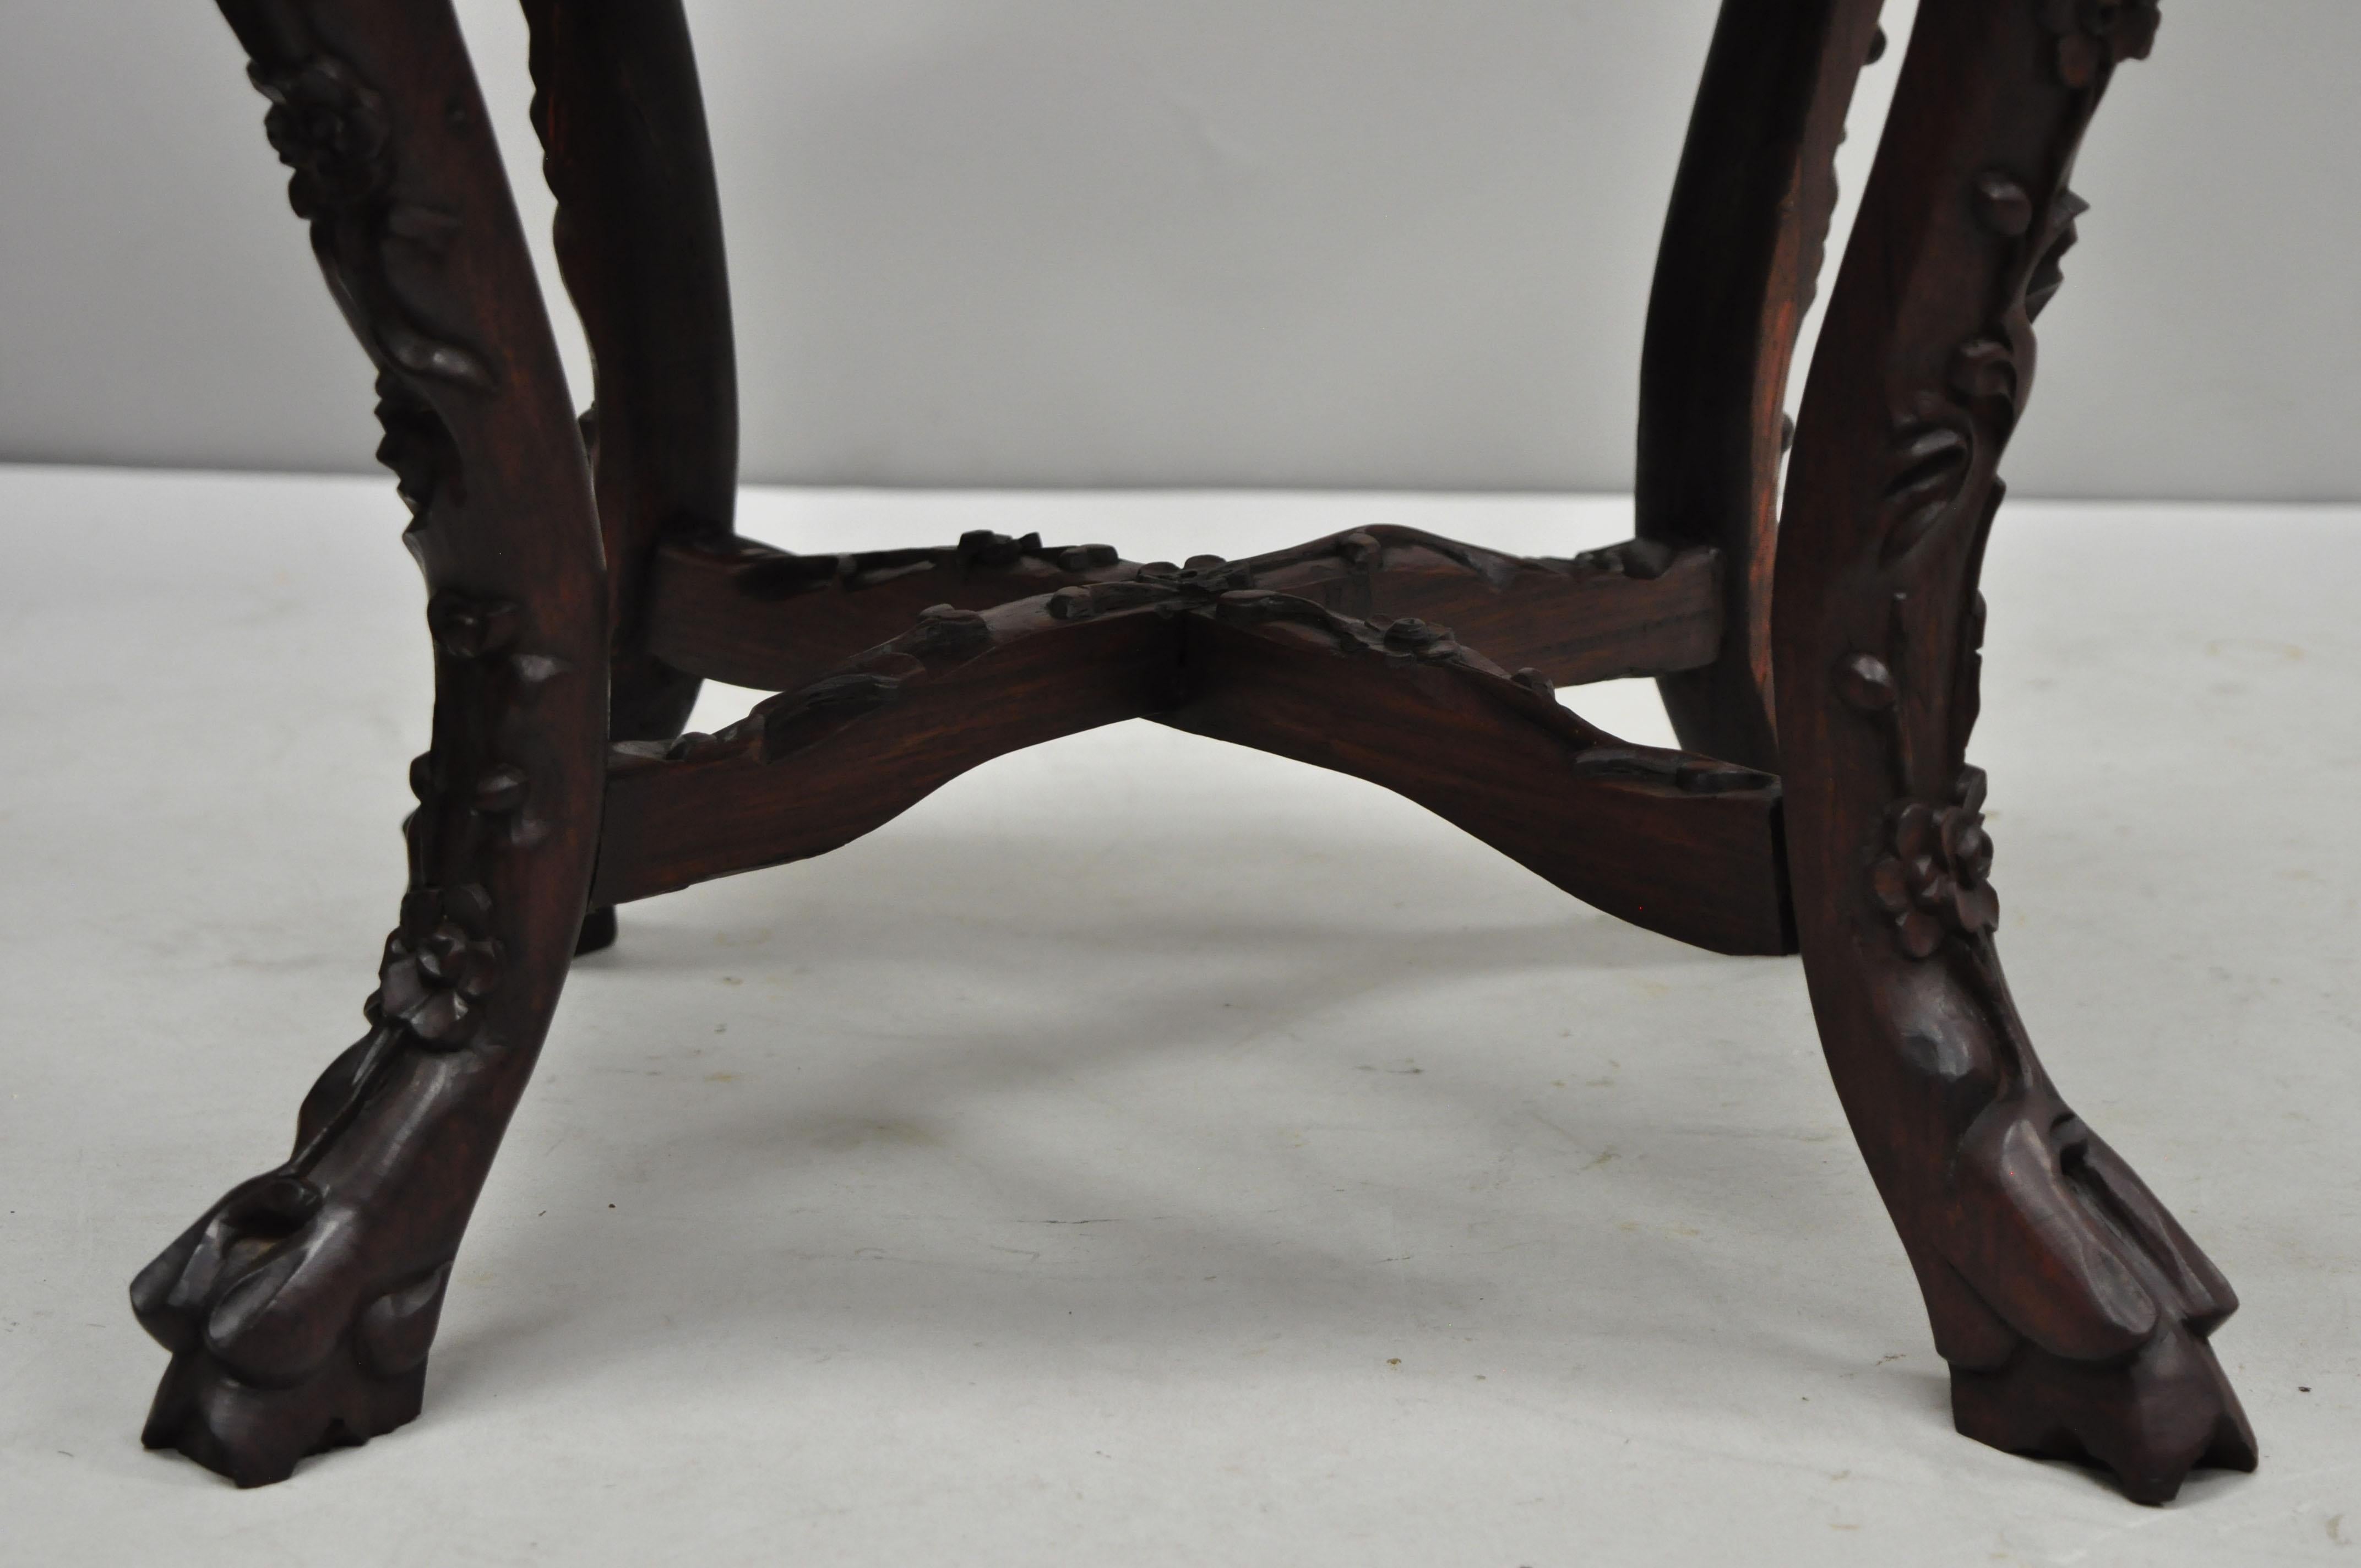 Antique Carved Hardwood Rosewood Marble-Top Chinese Pedestal Table Plant Stand D 1